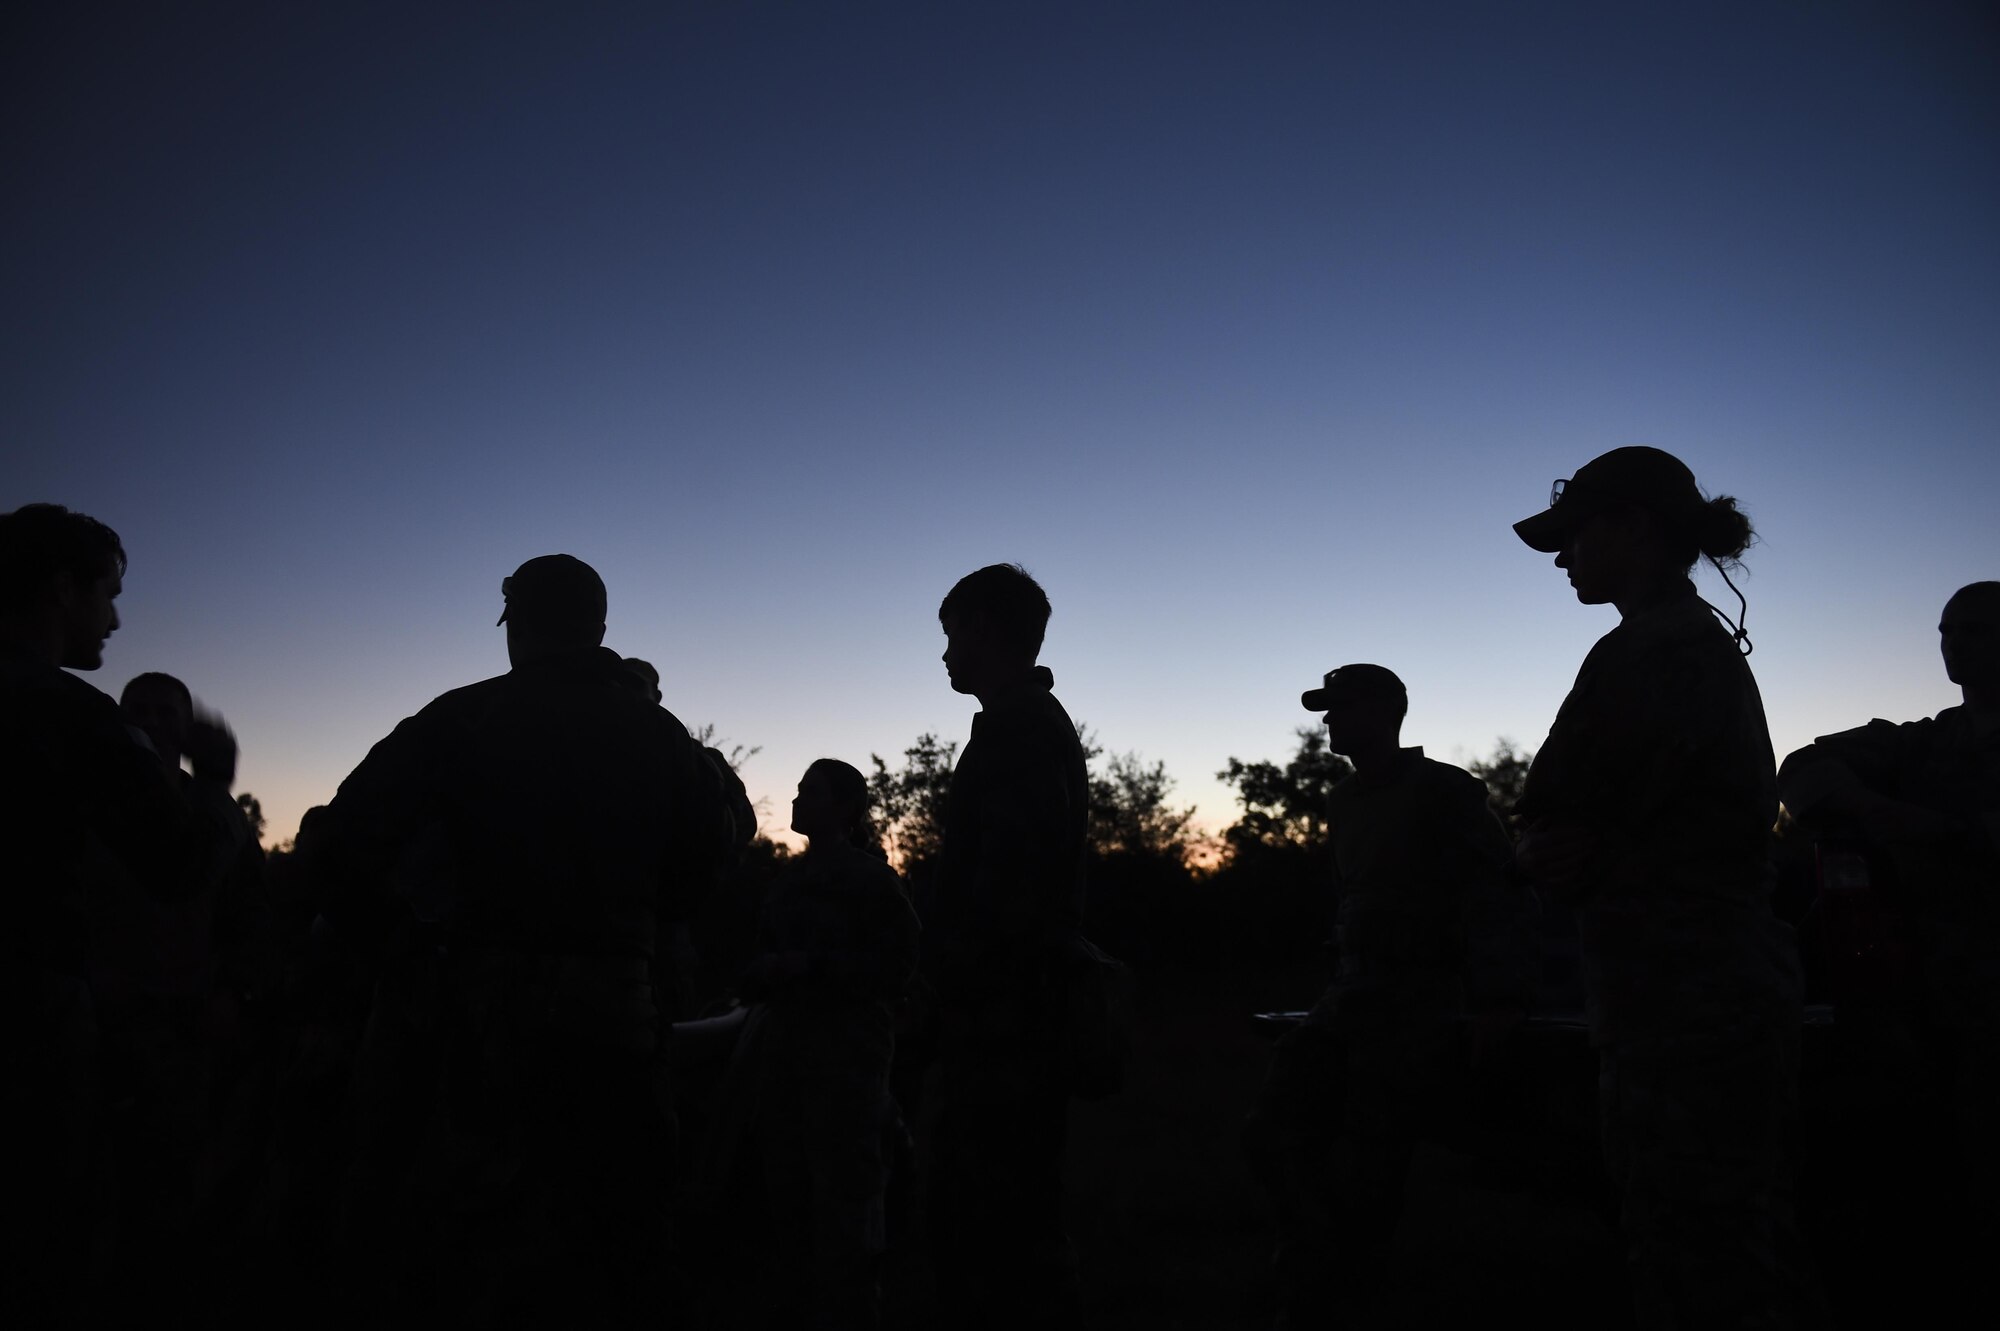 U.S. Air Force Special Operations Surgical Teams practiced integration operations with a special operations partner force during a Special Tactics exercise, Hurlburt Field, Fla., Oct. 16, 2015. SOST members are military medical professionals selected to provide battlefield trauma and other surgical support in a special operations mission set. SOST members often forward deploy to austere or hostile areas to perform life-saving trauma surgery for special operators with little to no facility support.